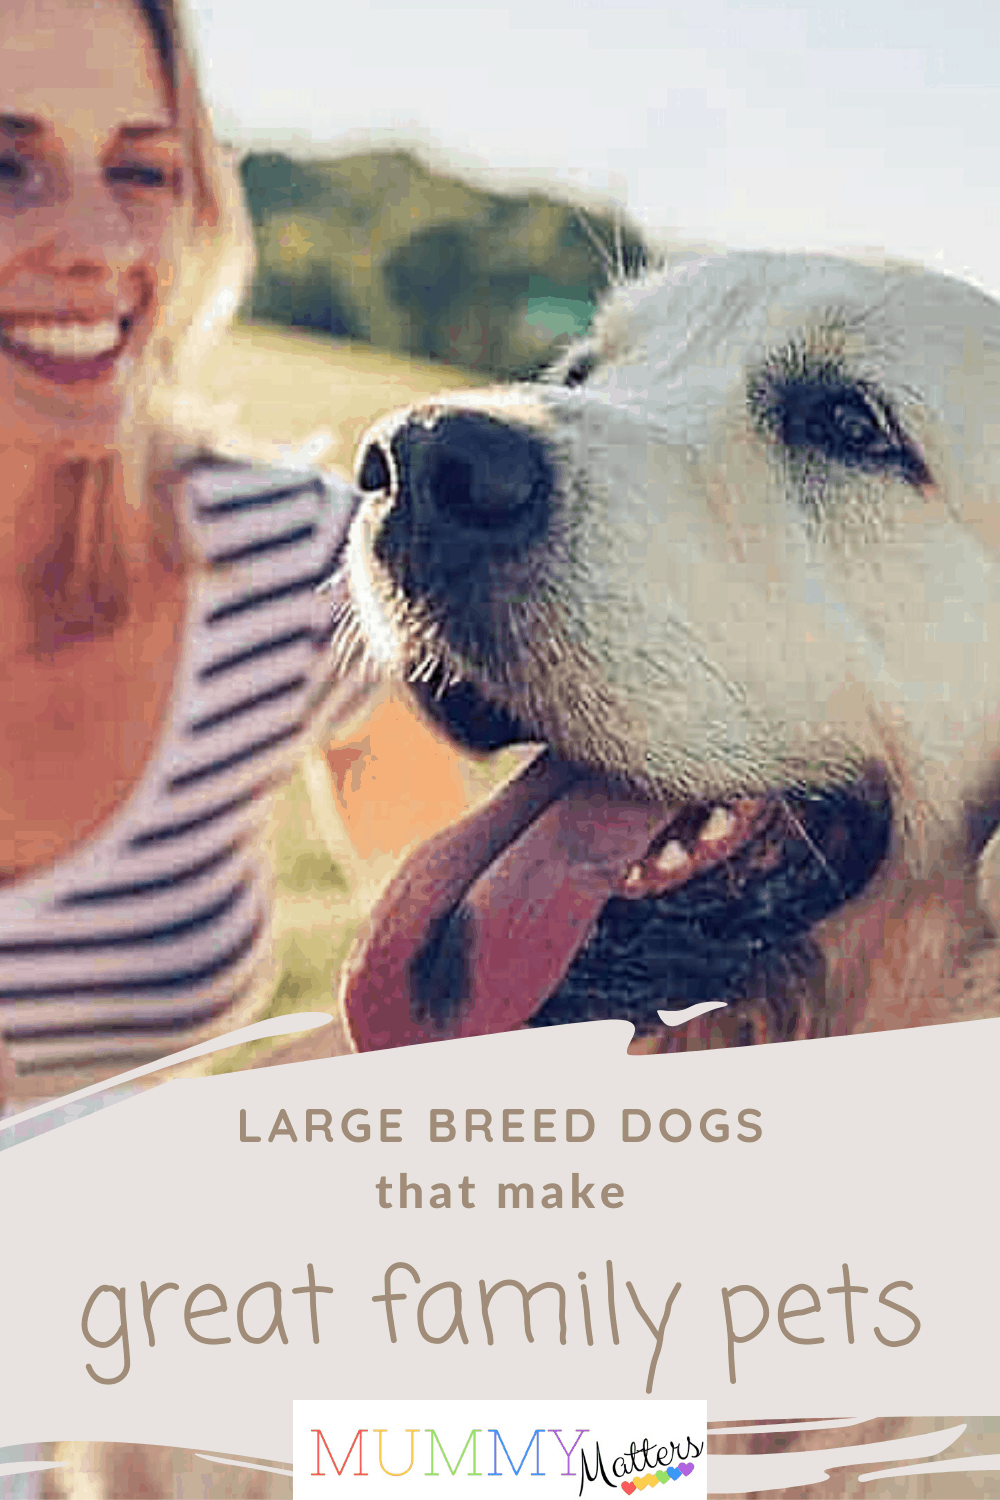 Keep reading to find out about some special large breed dogs and why they would make the best family pets!